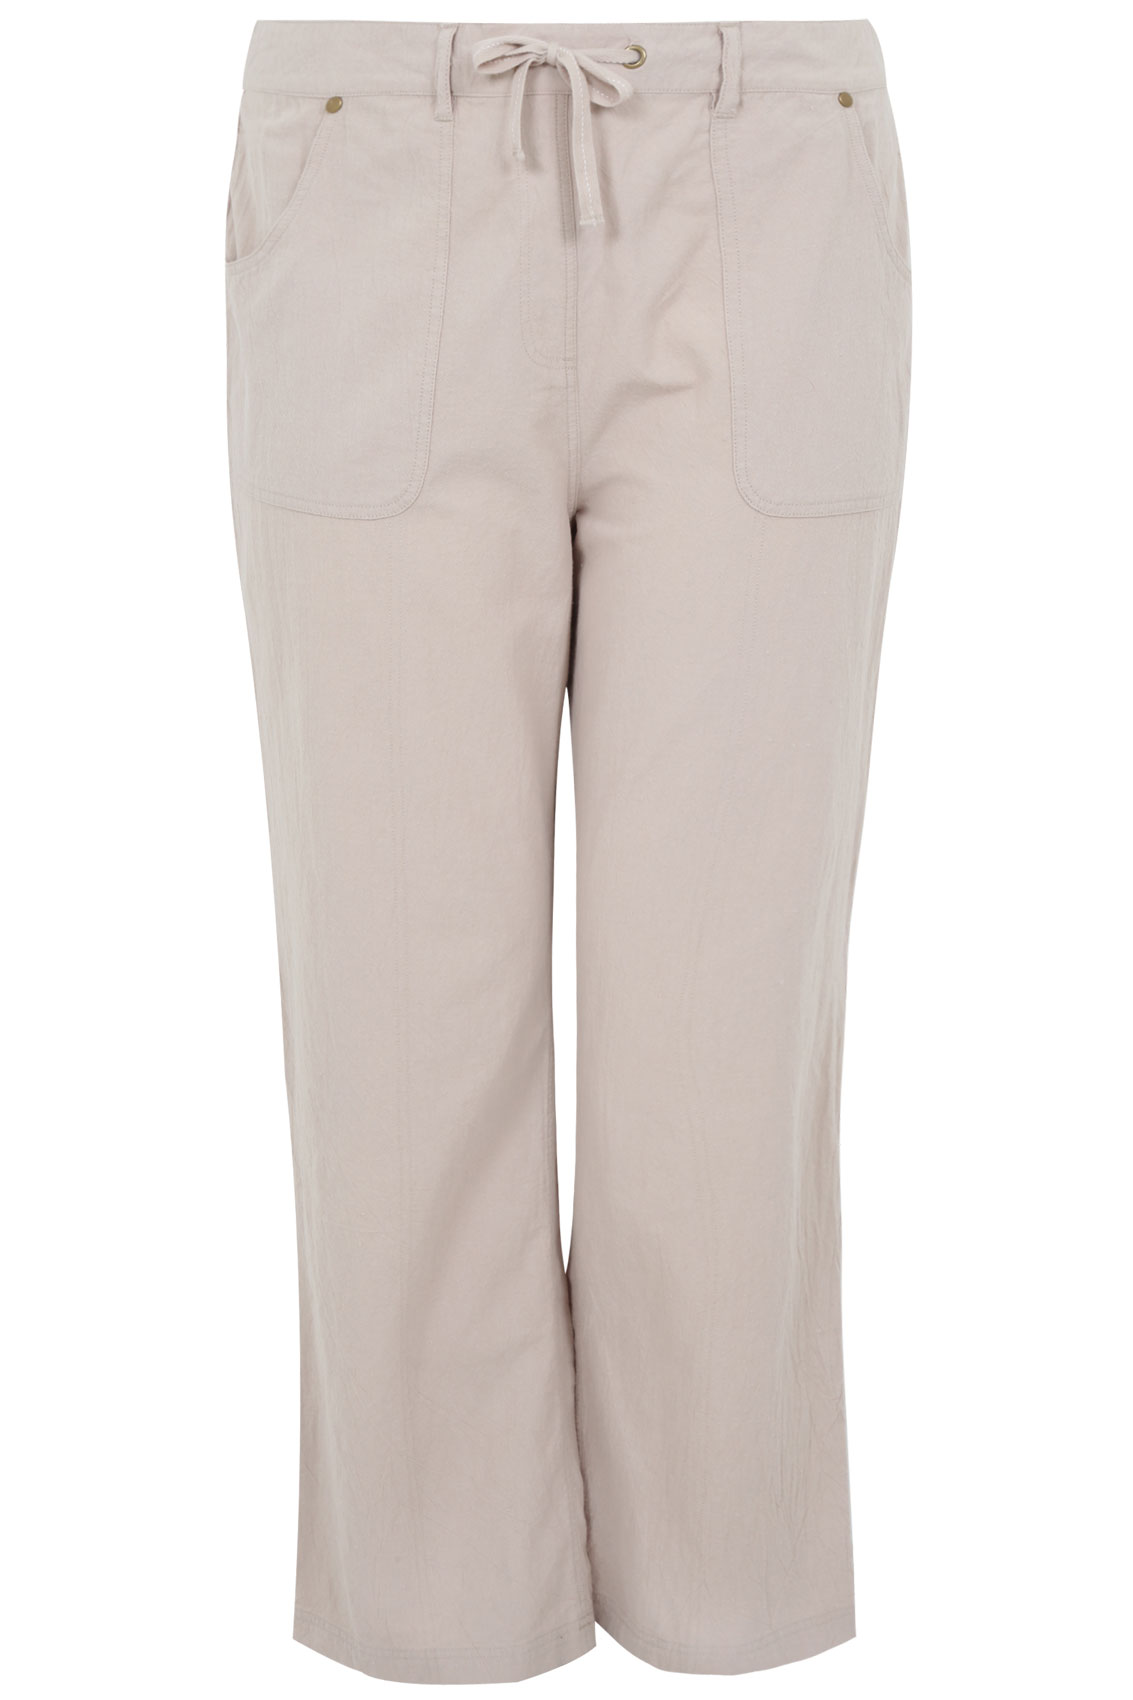 Stone Full Length Cool Cotton Trousers plus Size 14 to 36